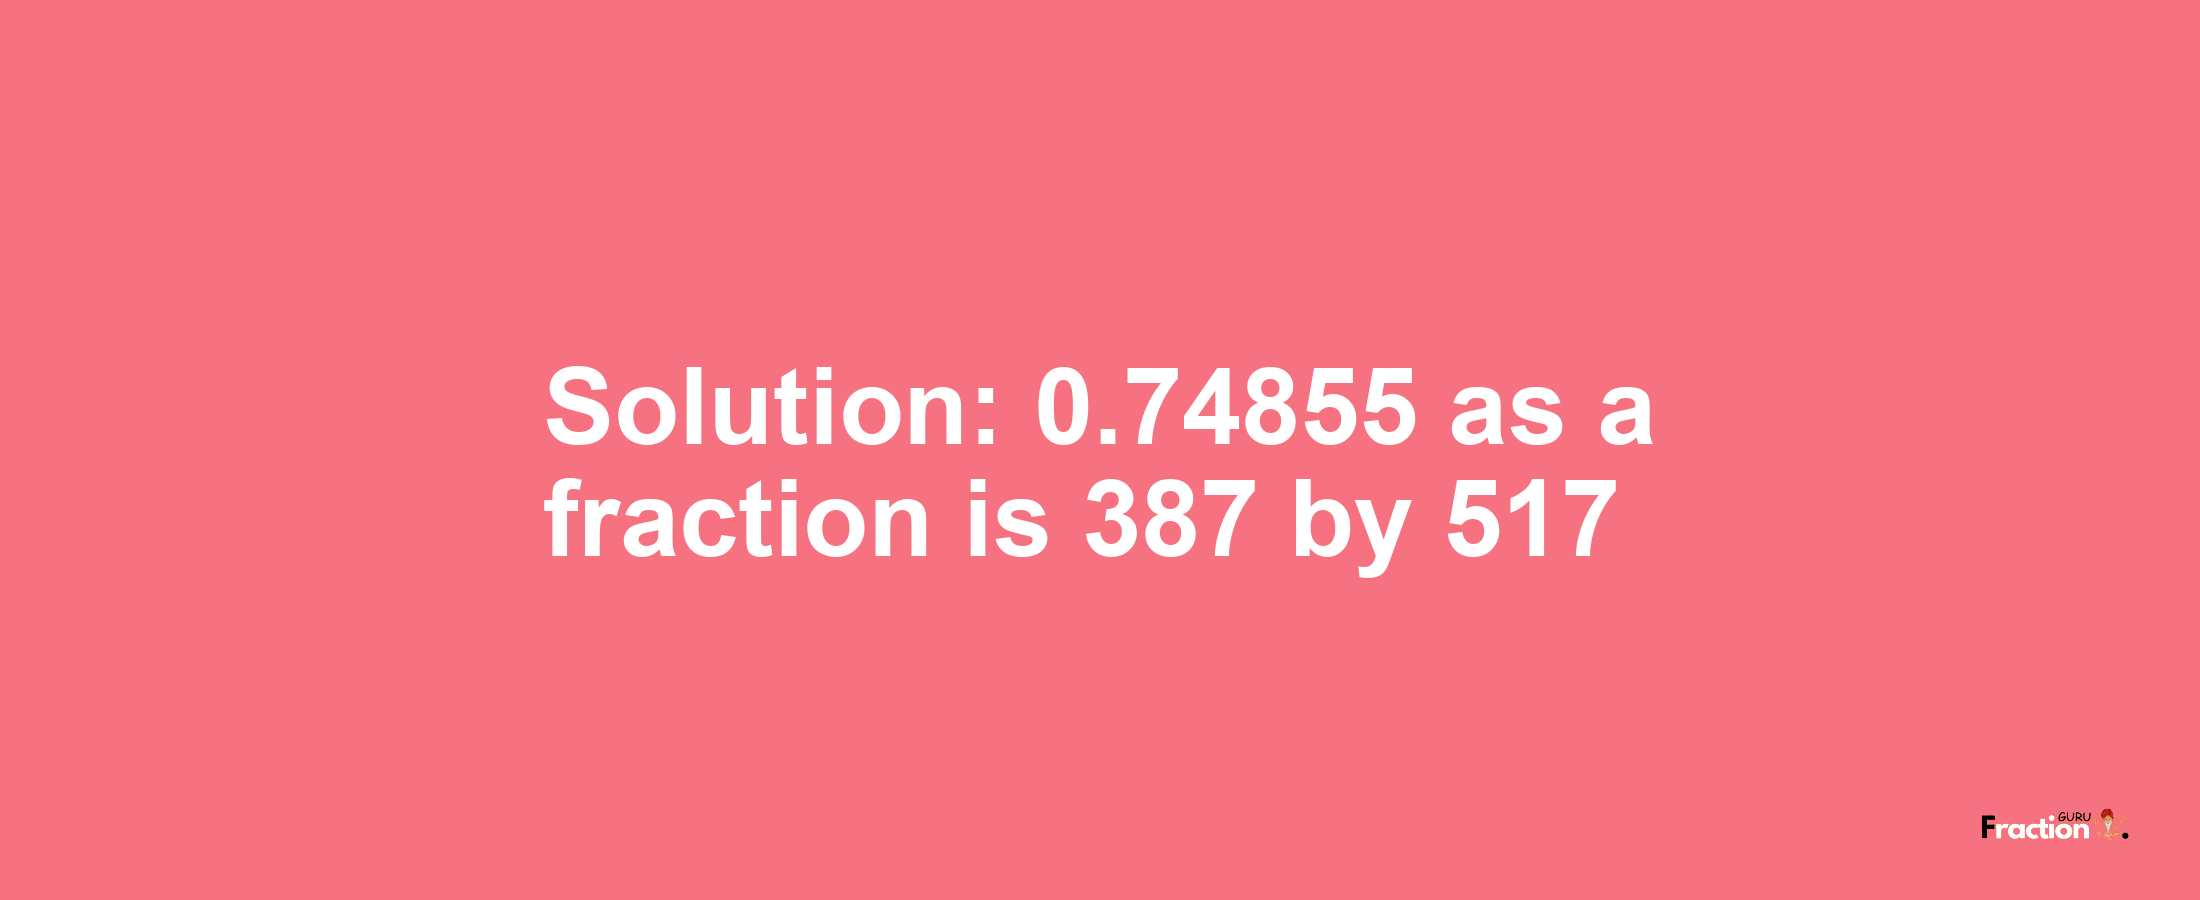 Solution:0.74855 as a fraction is 387/517